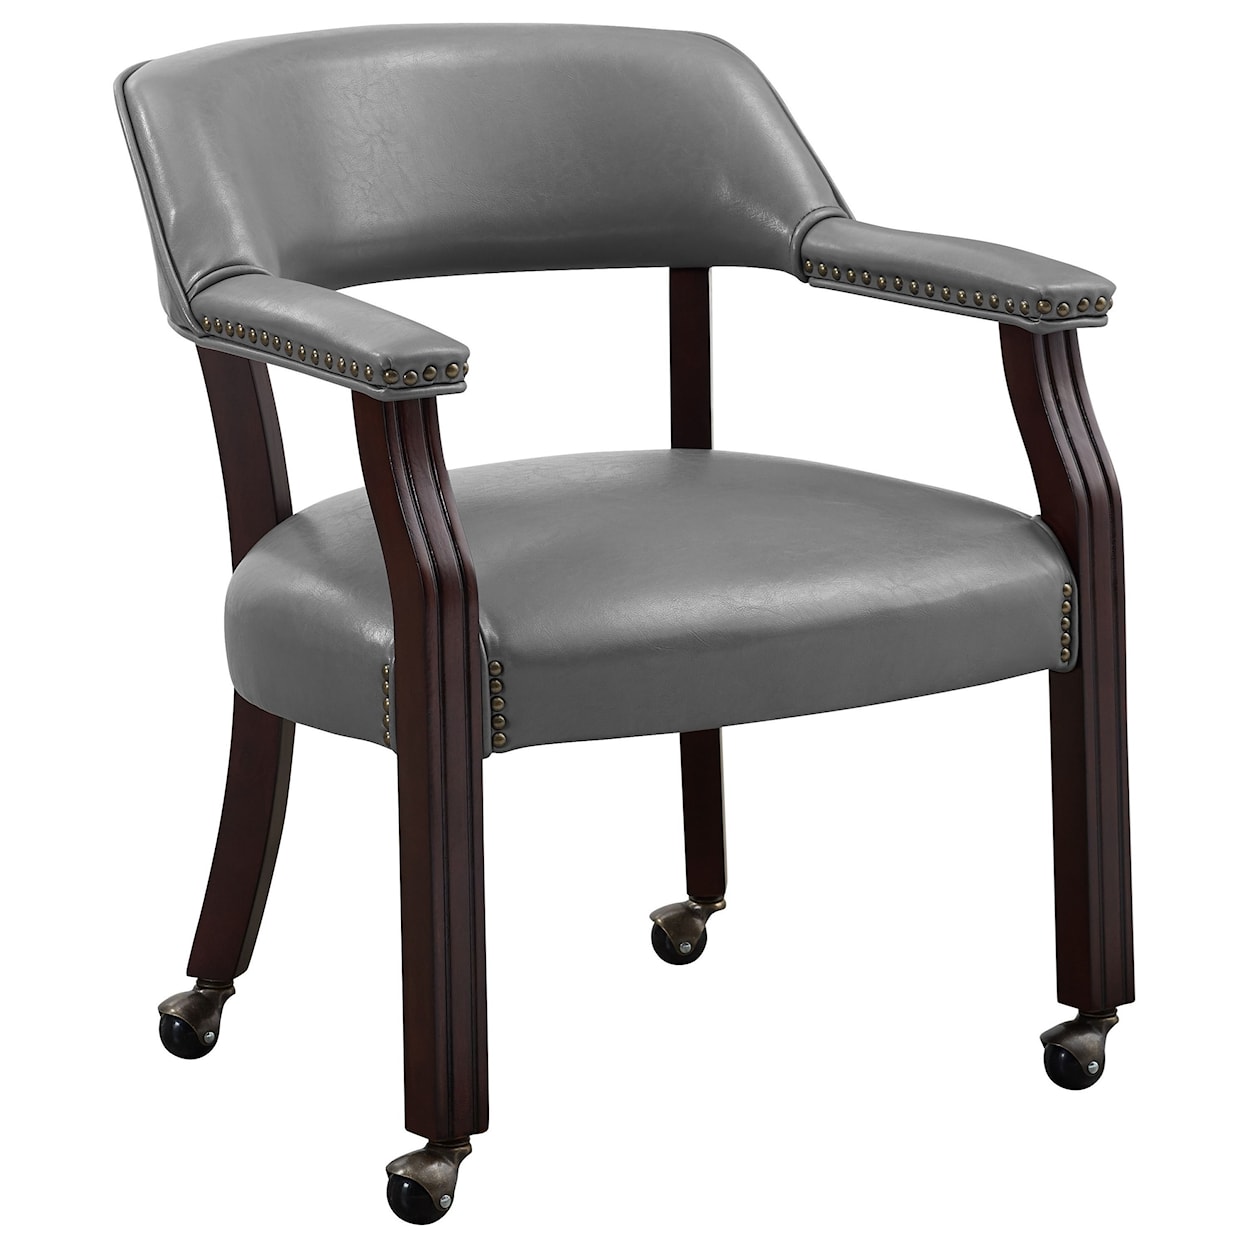 Steve Silver Tournament Arm Chair with Casters